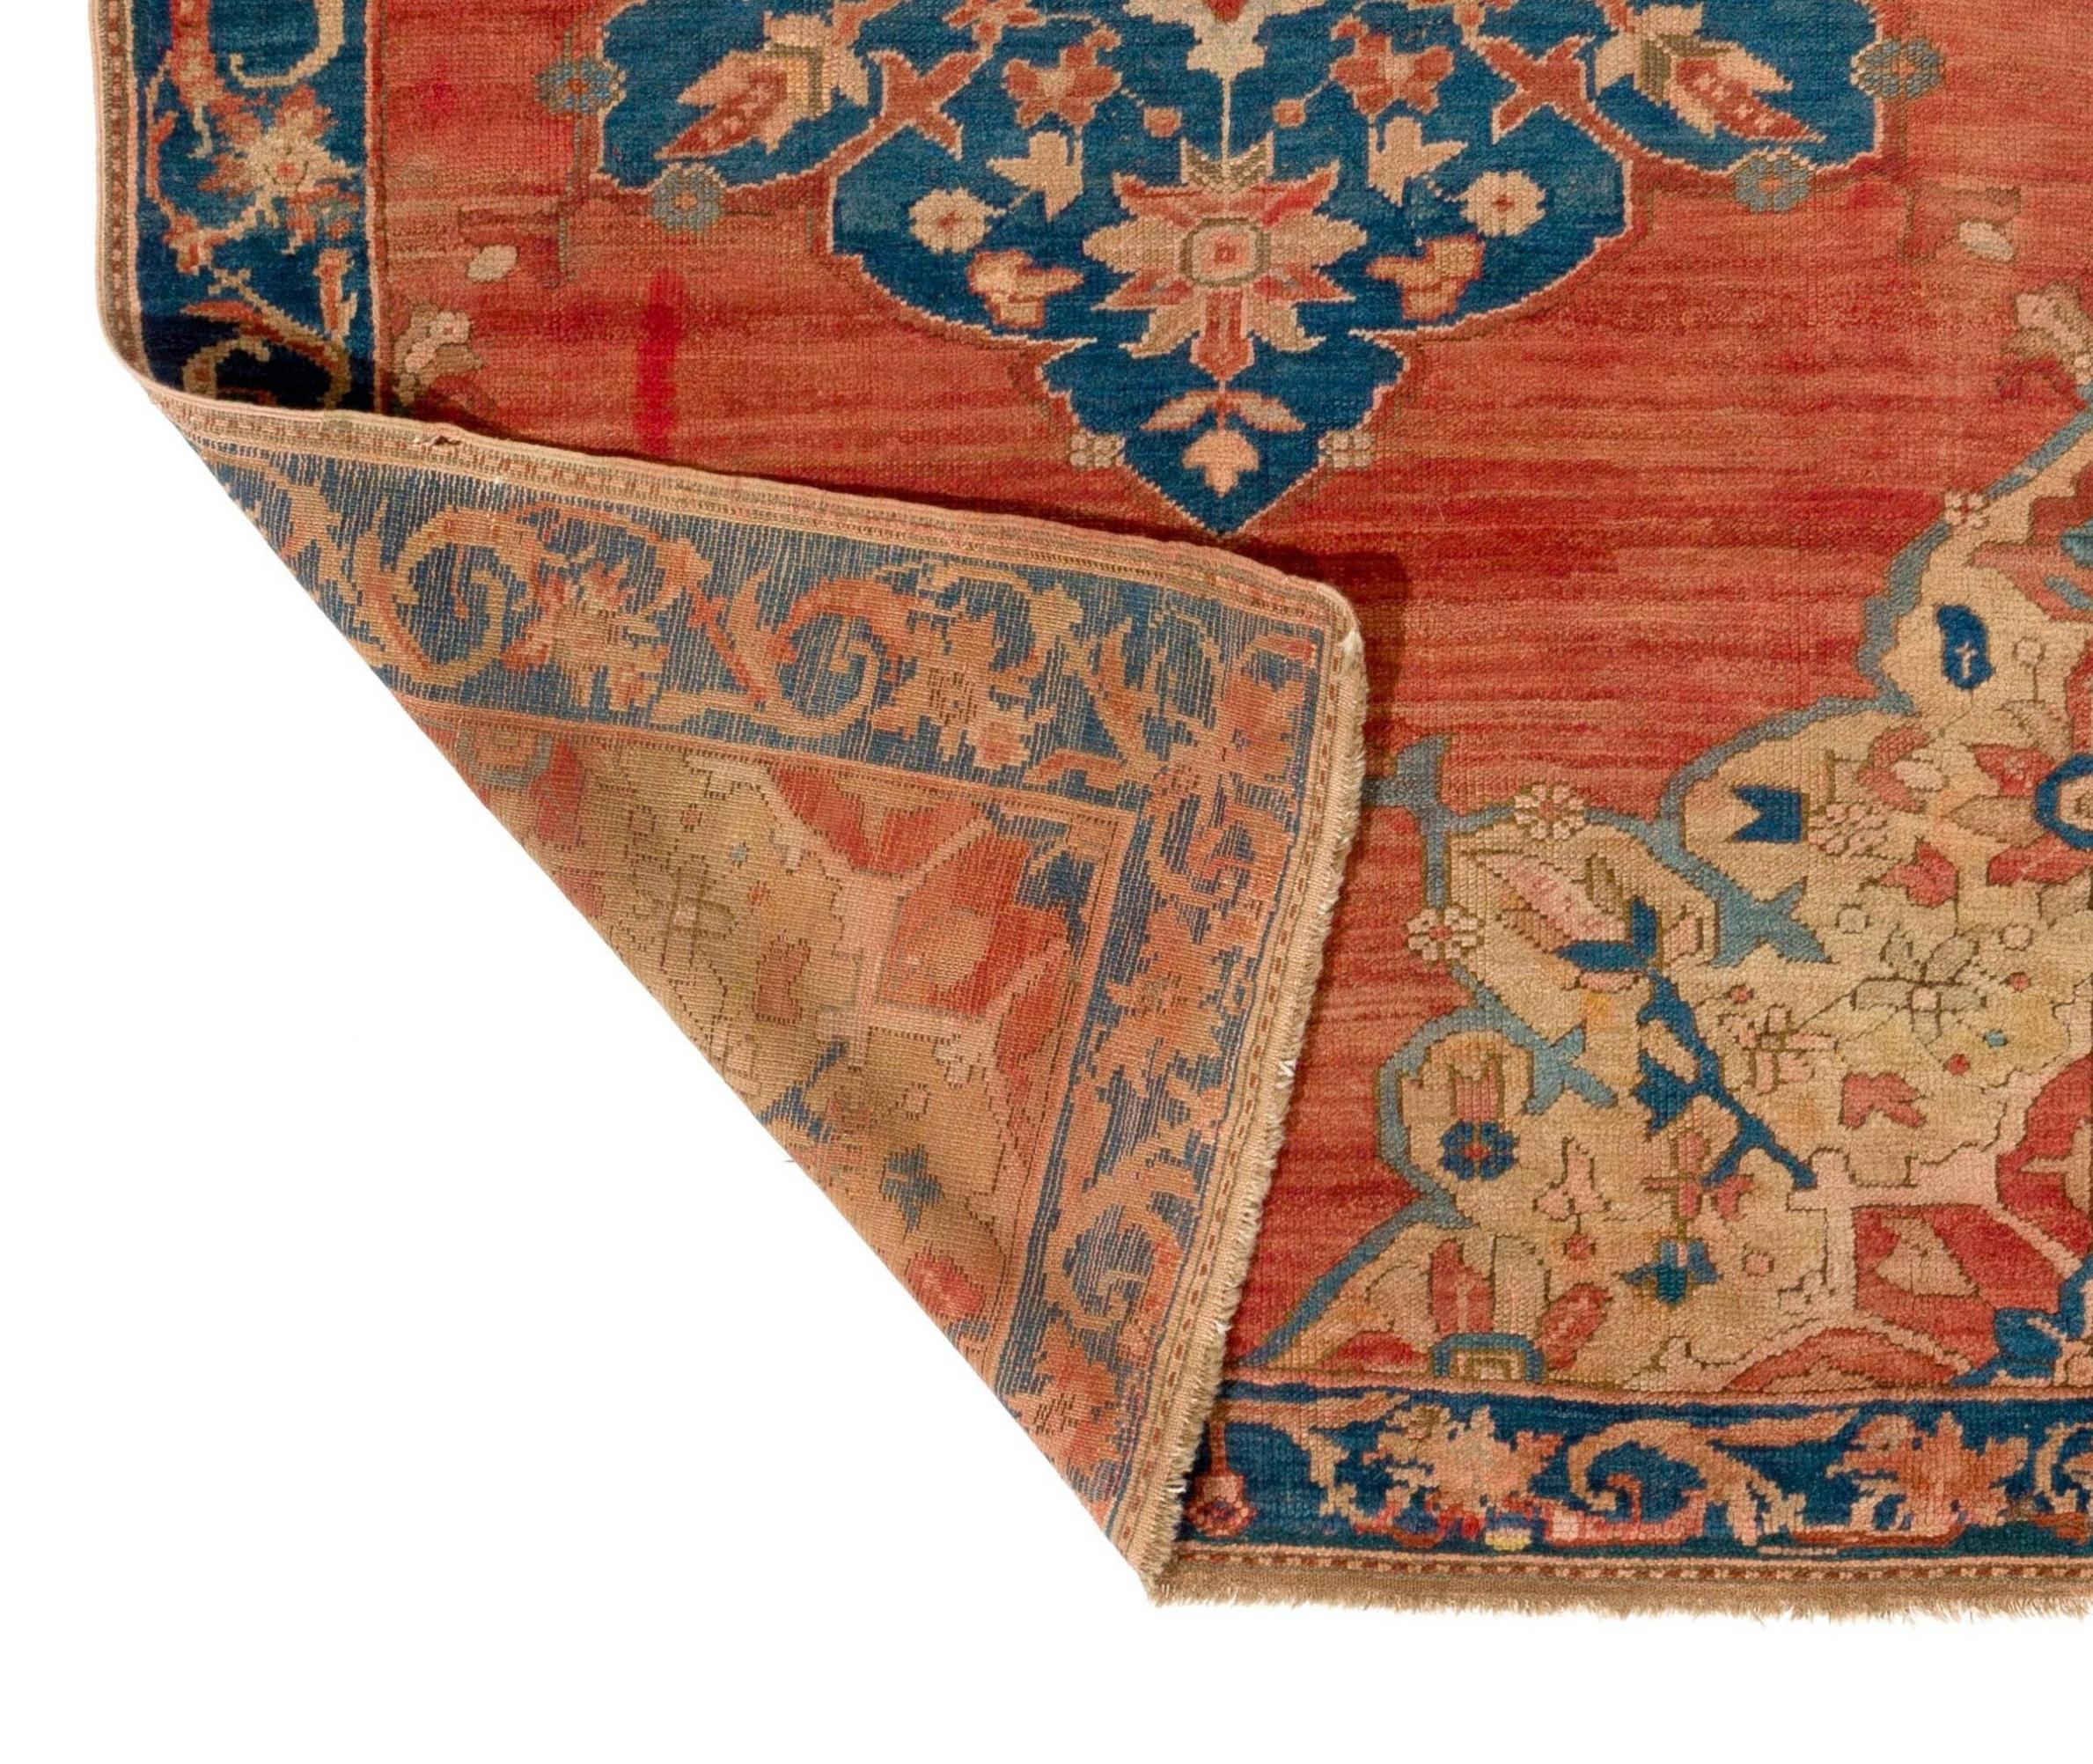 An antique hand-knotted South West Anatolian rug from Fethiye whose ancient name was Telmessos and 19th century name was Megri. This lovely rug has a timeless, layered, eclectic quality to it. It has all the classical elements of what would be